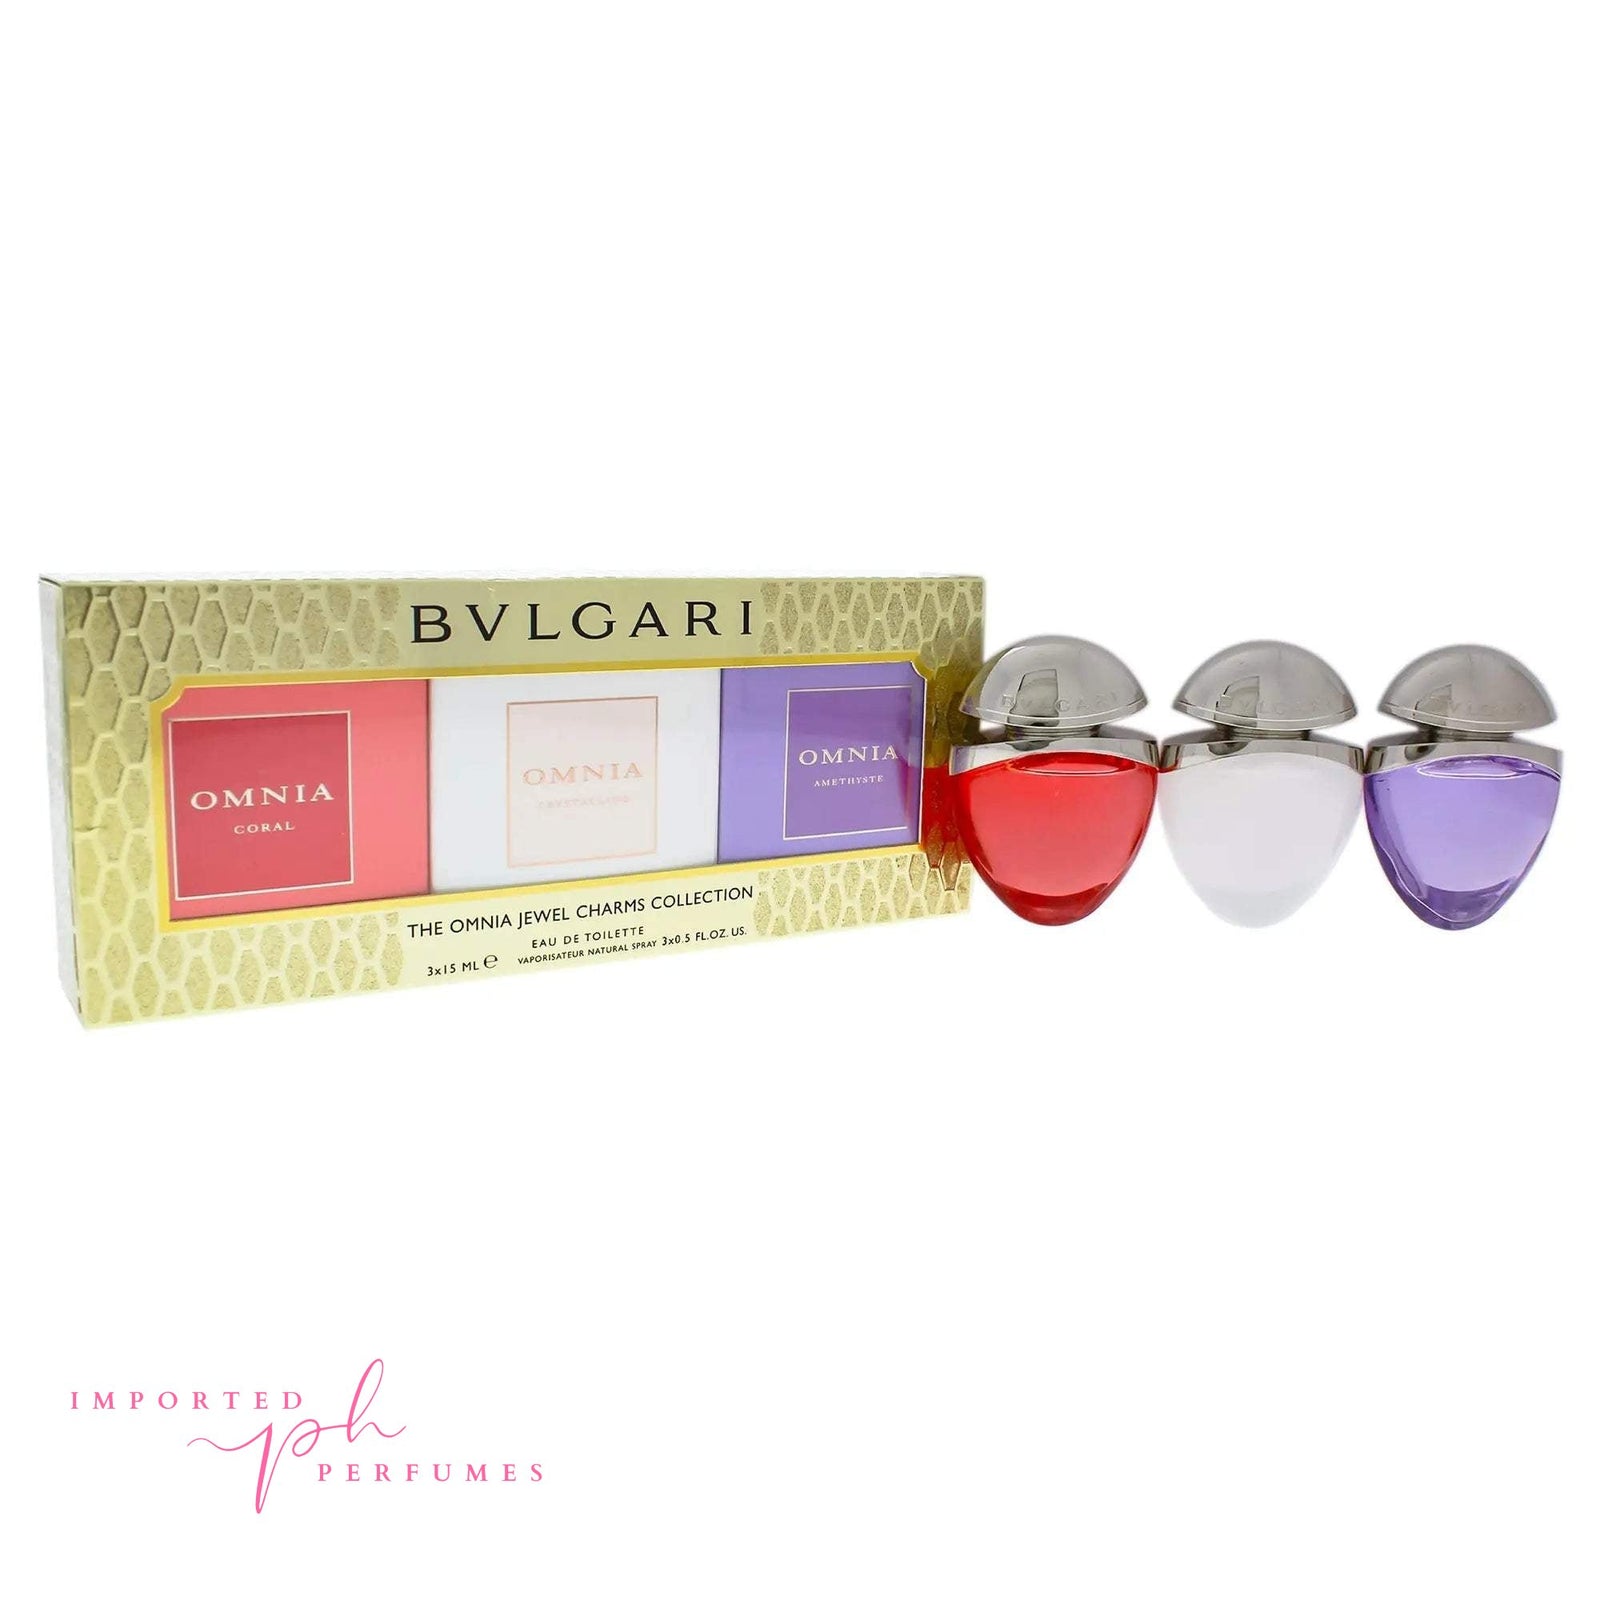 Bvlgari Omnia Jewels Charms Fragrance Gift Set EDT-Imported Perfumes Co-Bvlgari,Gift,gift sets,set,sets